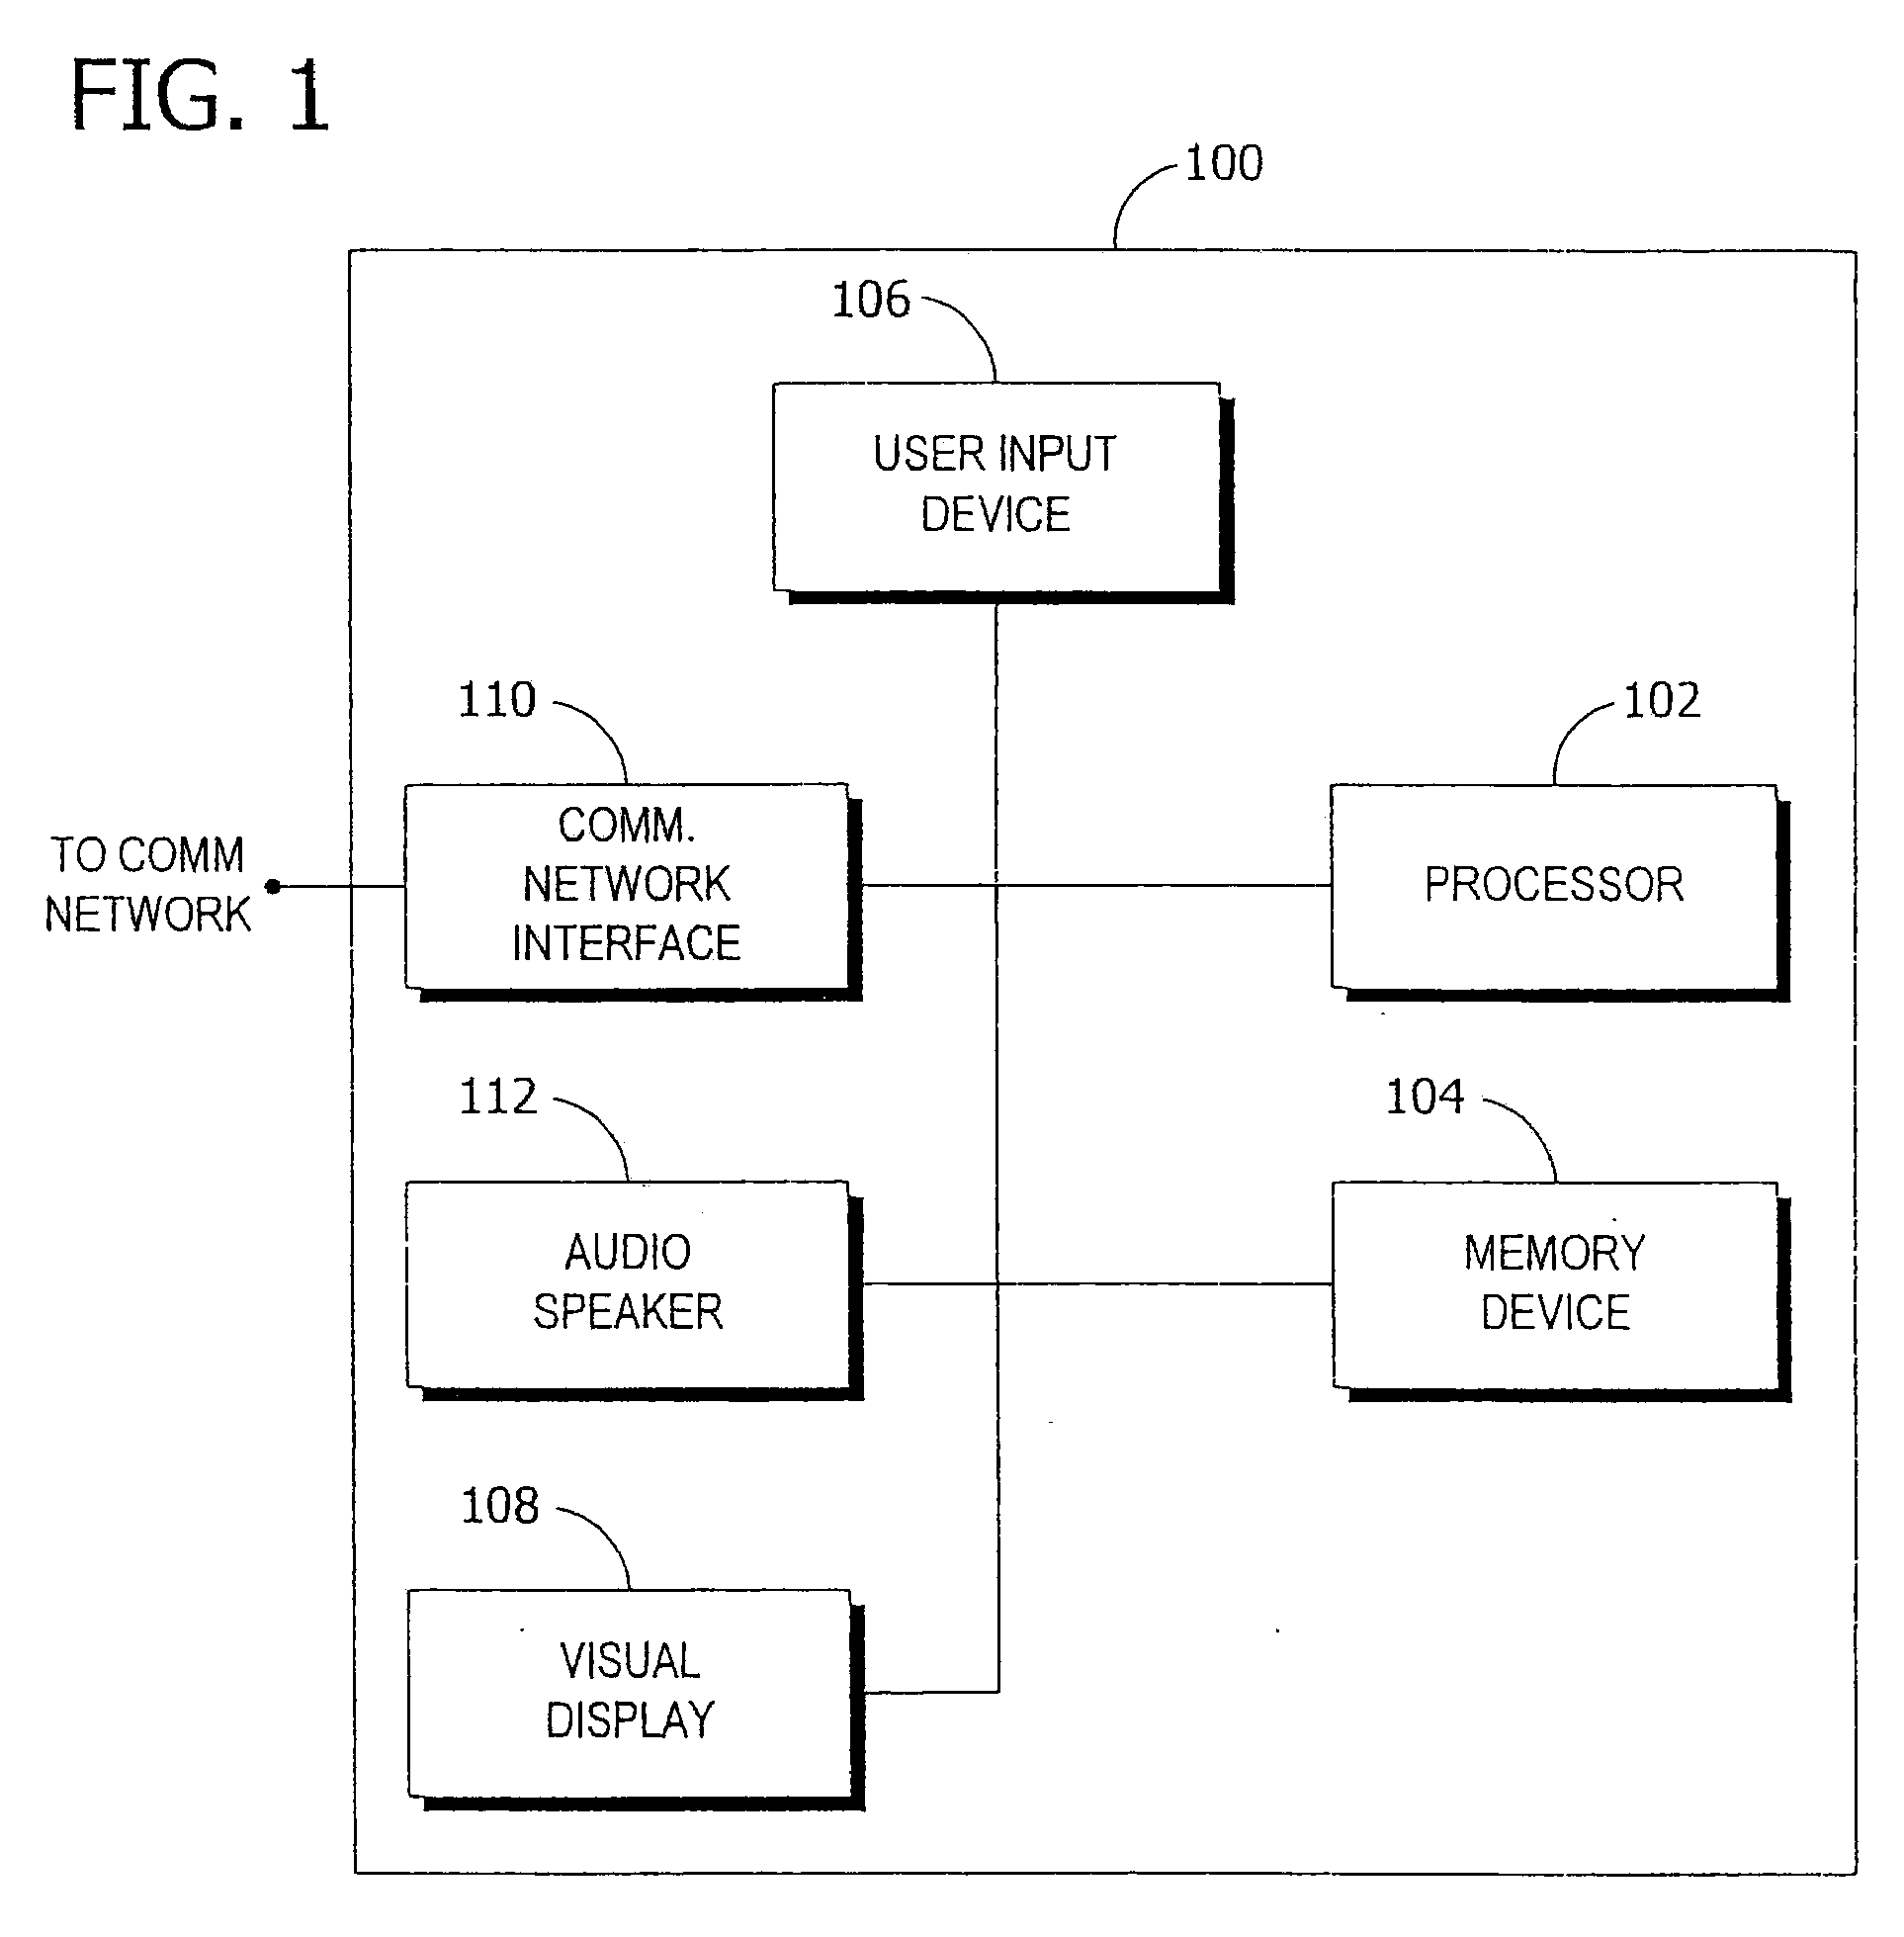 Method for Assisting a User in Obtaining a Repair Service at the User's House or Building